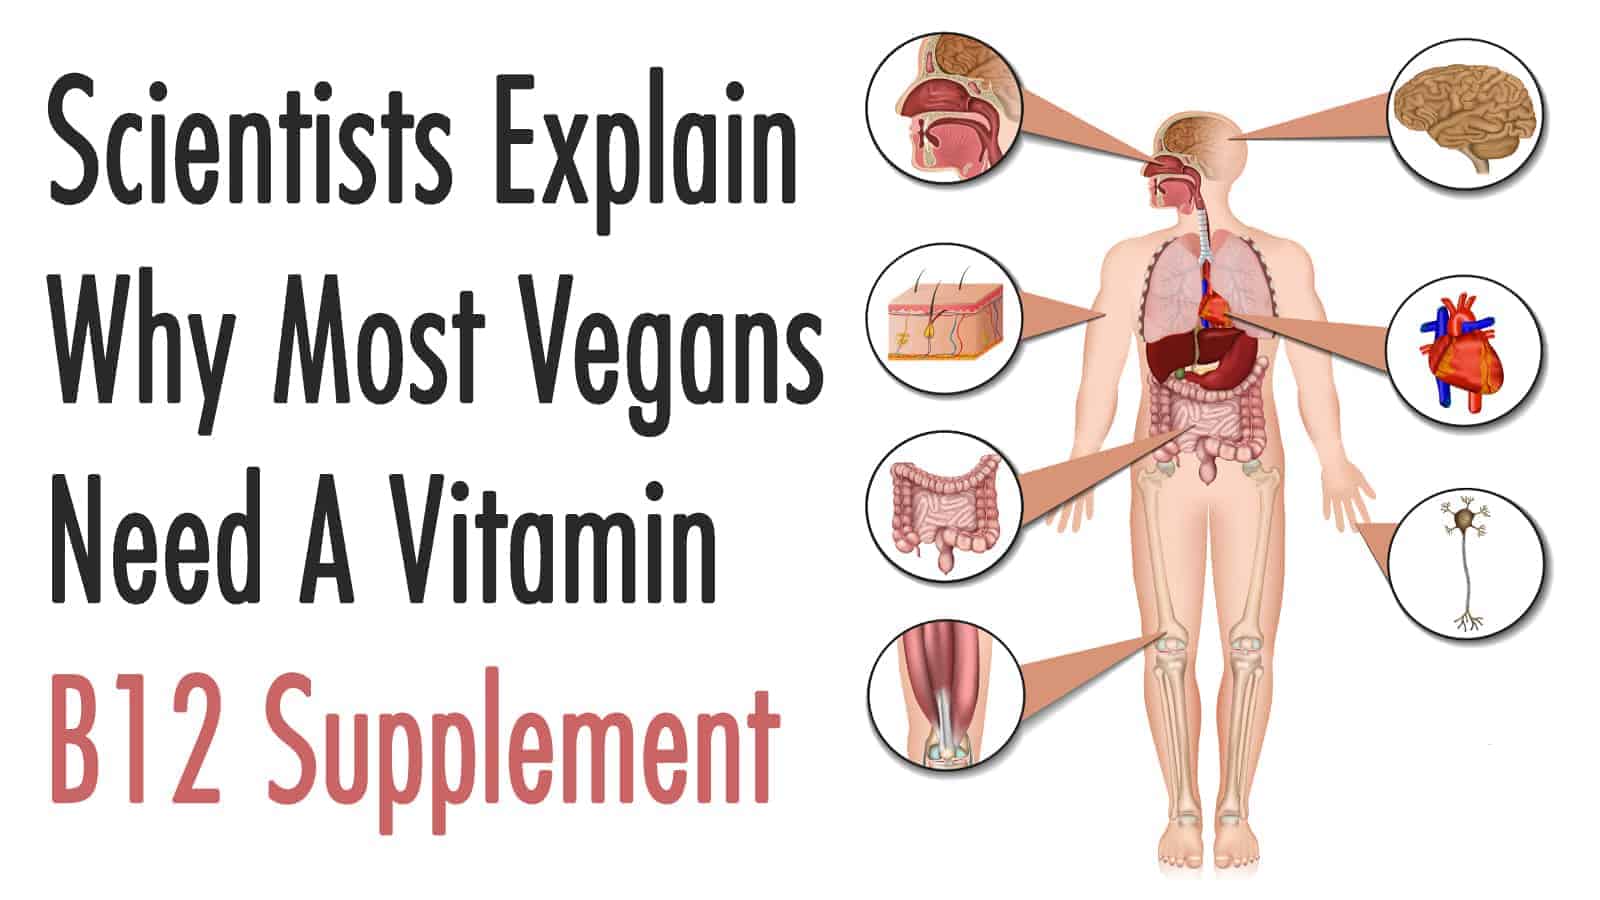 Scientists Explain Why Most Vegans Need A Vitamin B12 Supplement